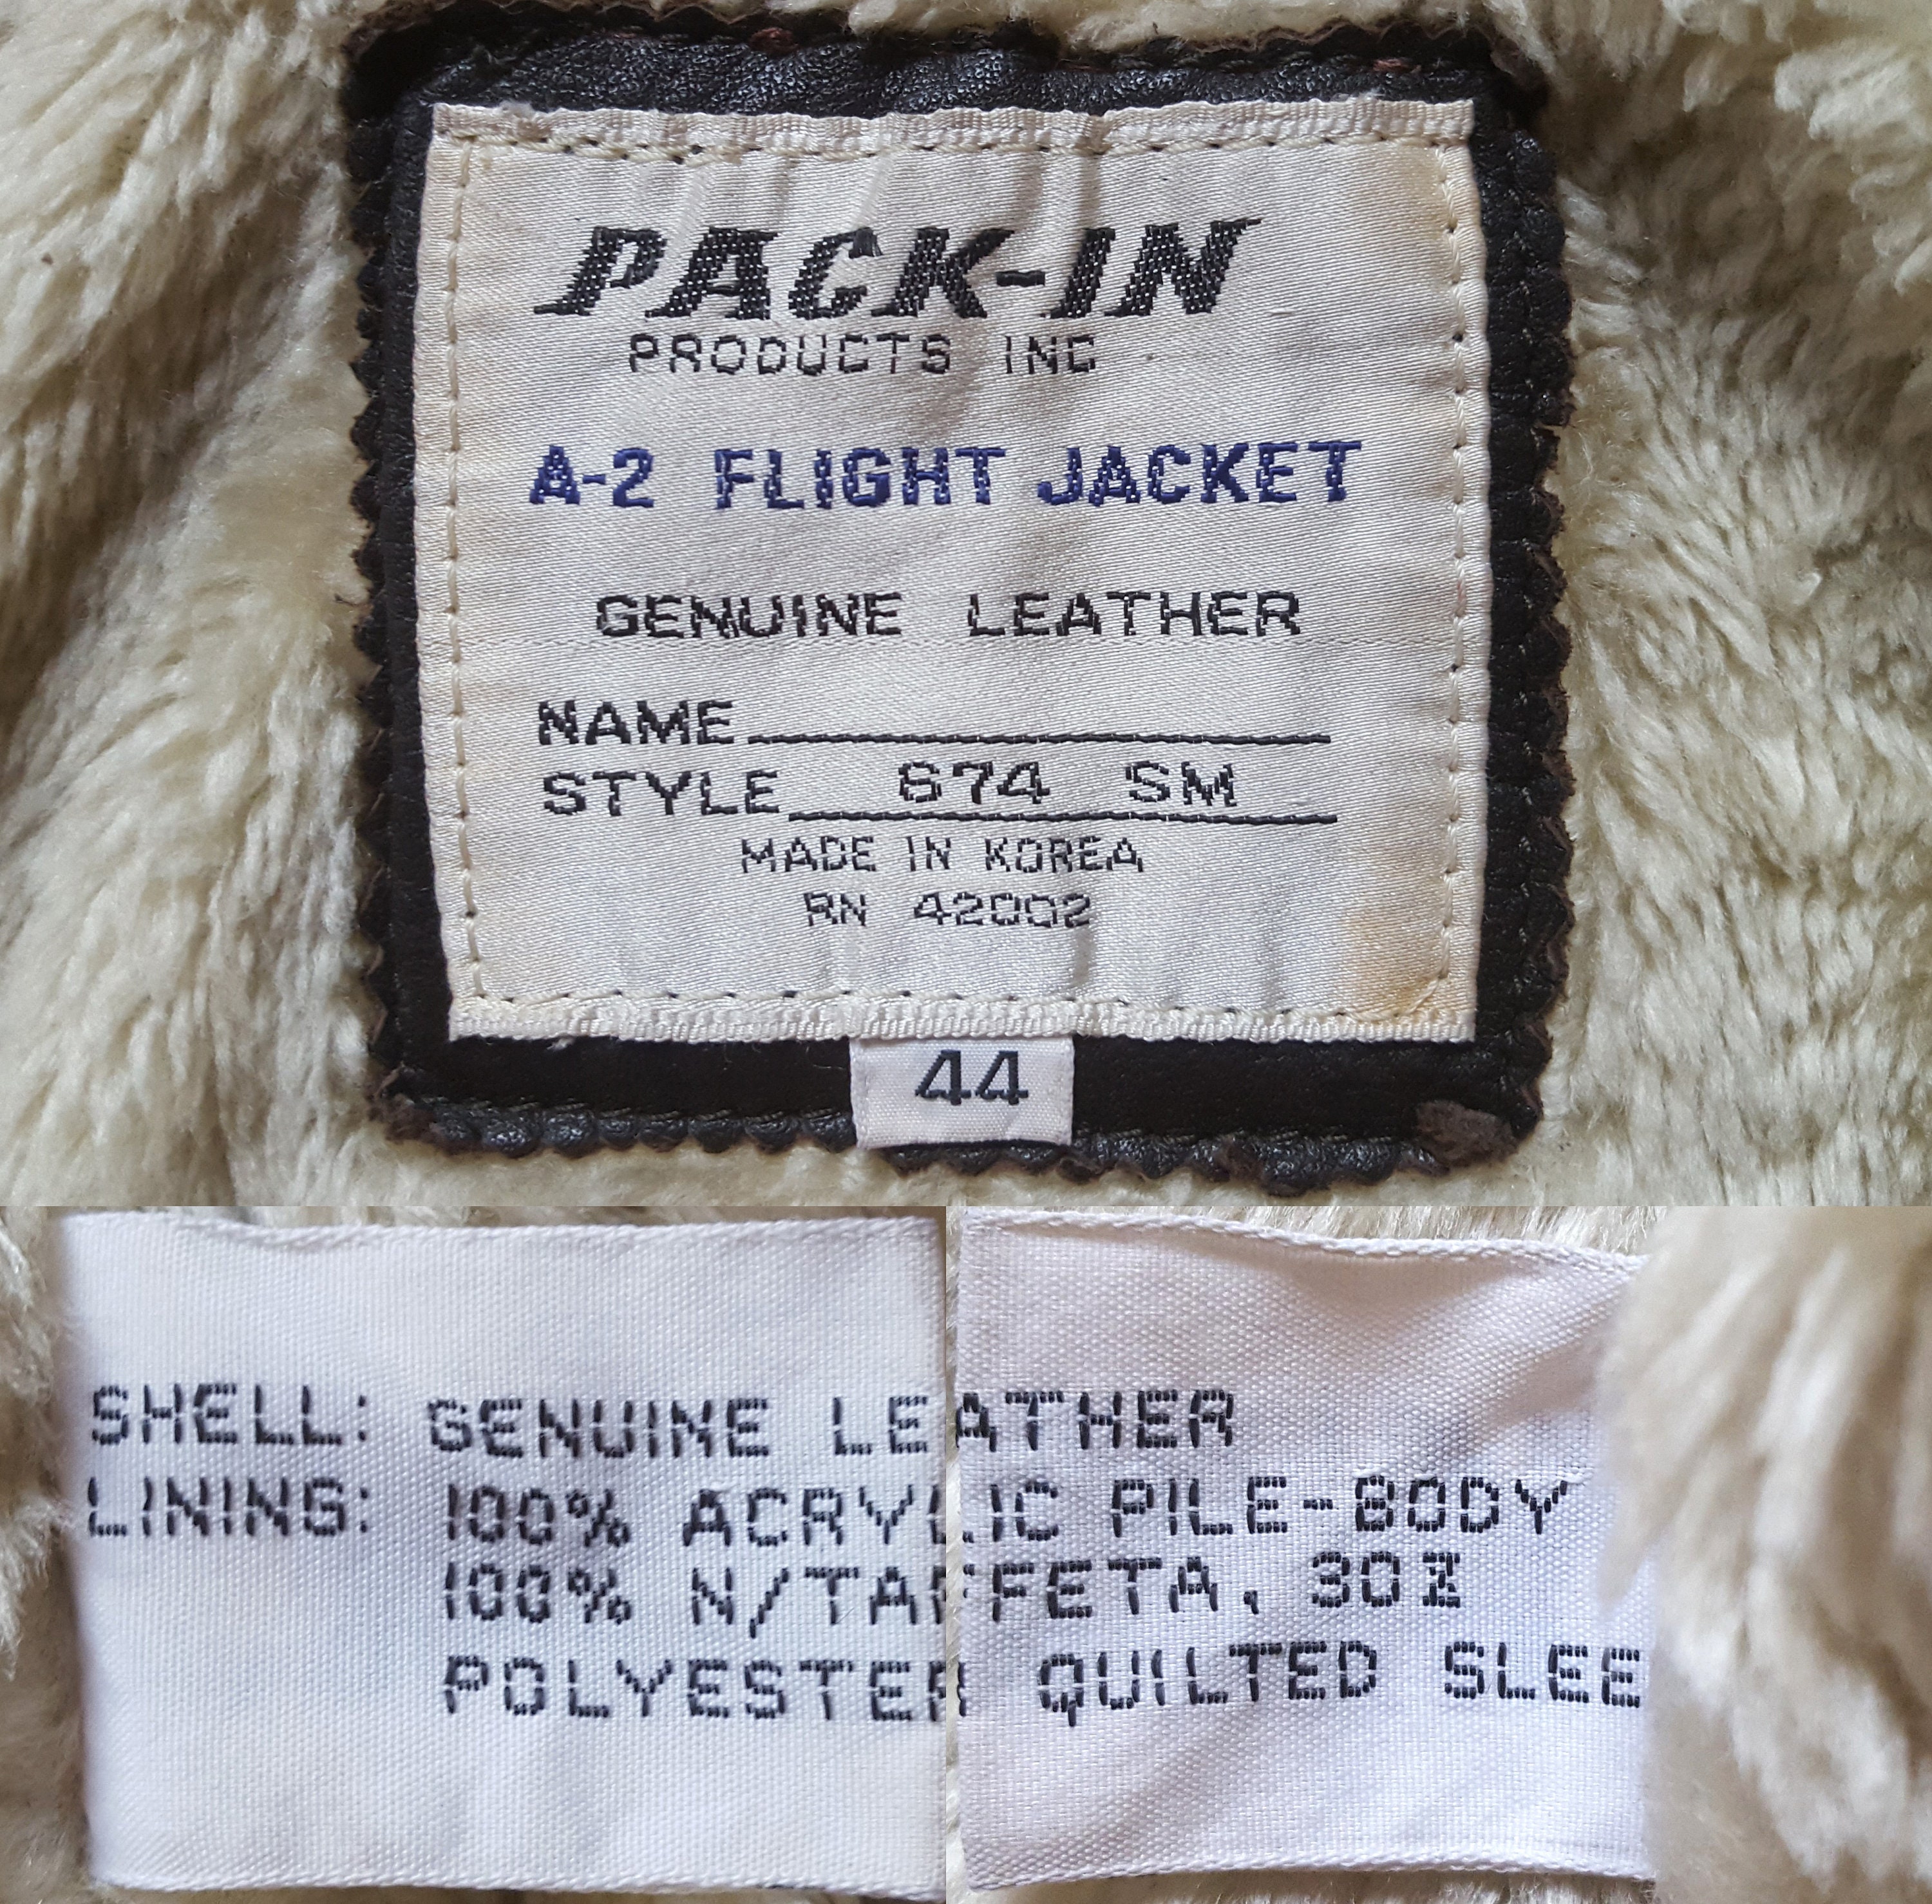 Rare Vintage 70s Pack-in Products Inc. A-2 674 SM Flight Pilot Bomber ...